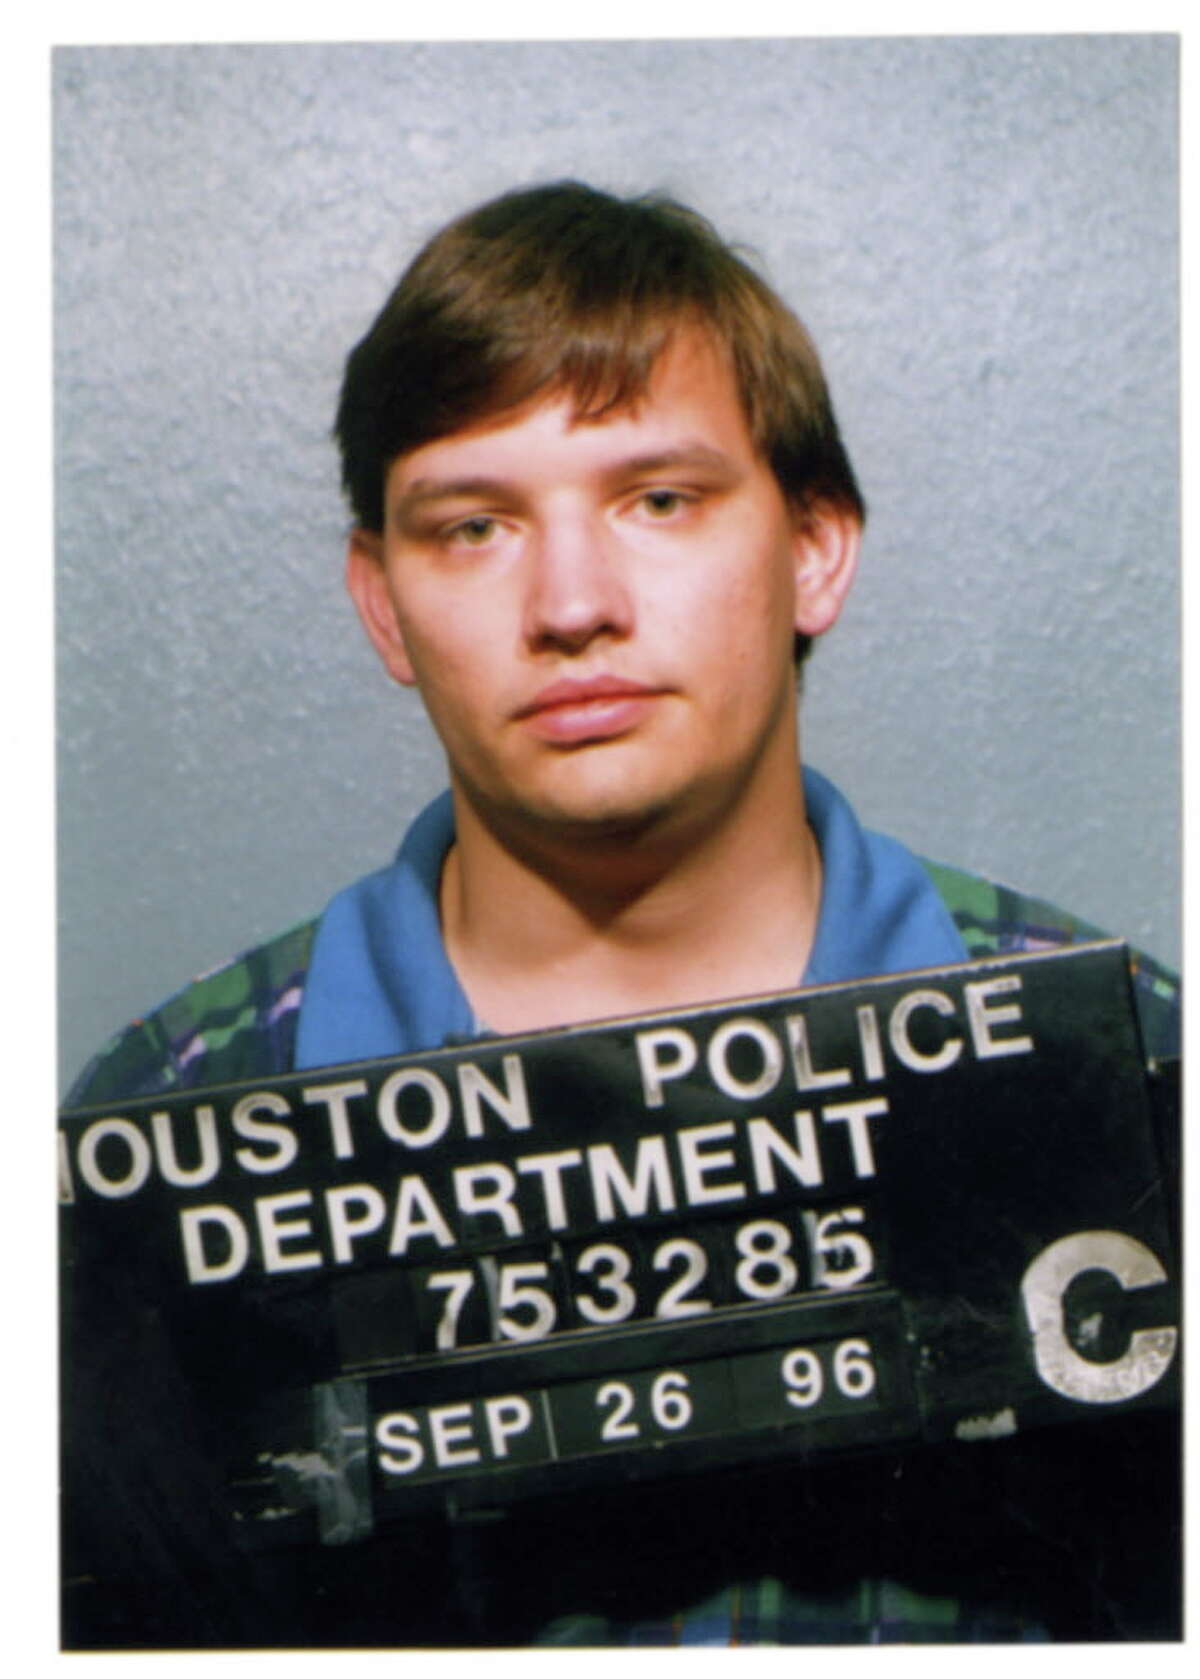 This 1996 photo shows Jason Posey when he was booked by HPD after attempting to elude officers who tried to stop him after Posey ran a red light. Posey, who was working as an aide for Stockman at the time, received deferred prosecution.